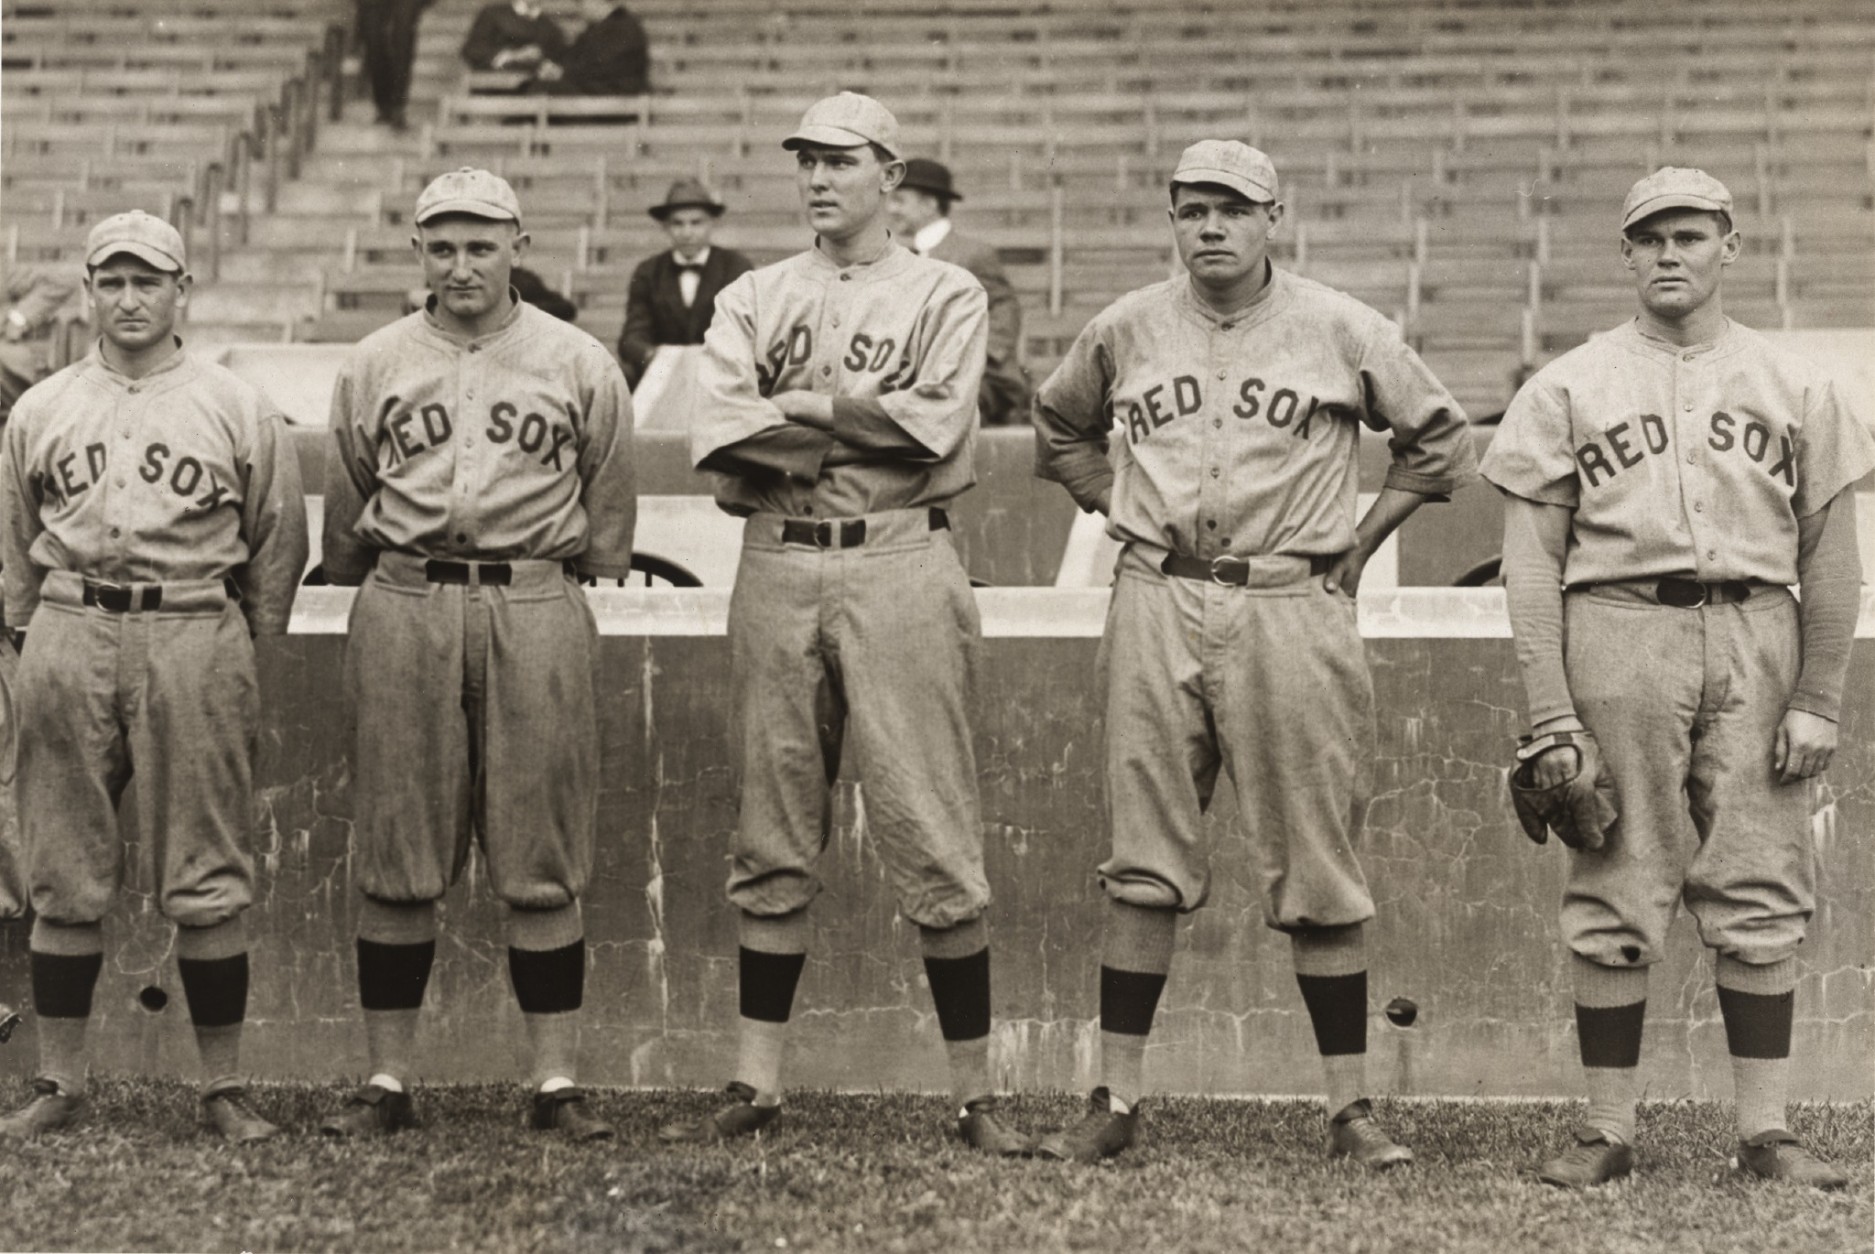 Babe Ruth and other Red Sox pitchers by Underwood & Underwood, 1915. (Courtesy National Portrait Gallery, Smithsonian Institution)